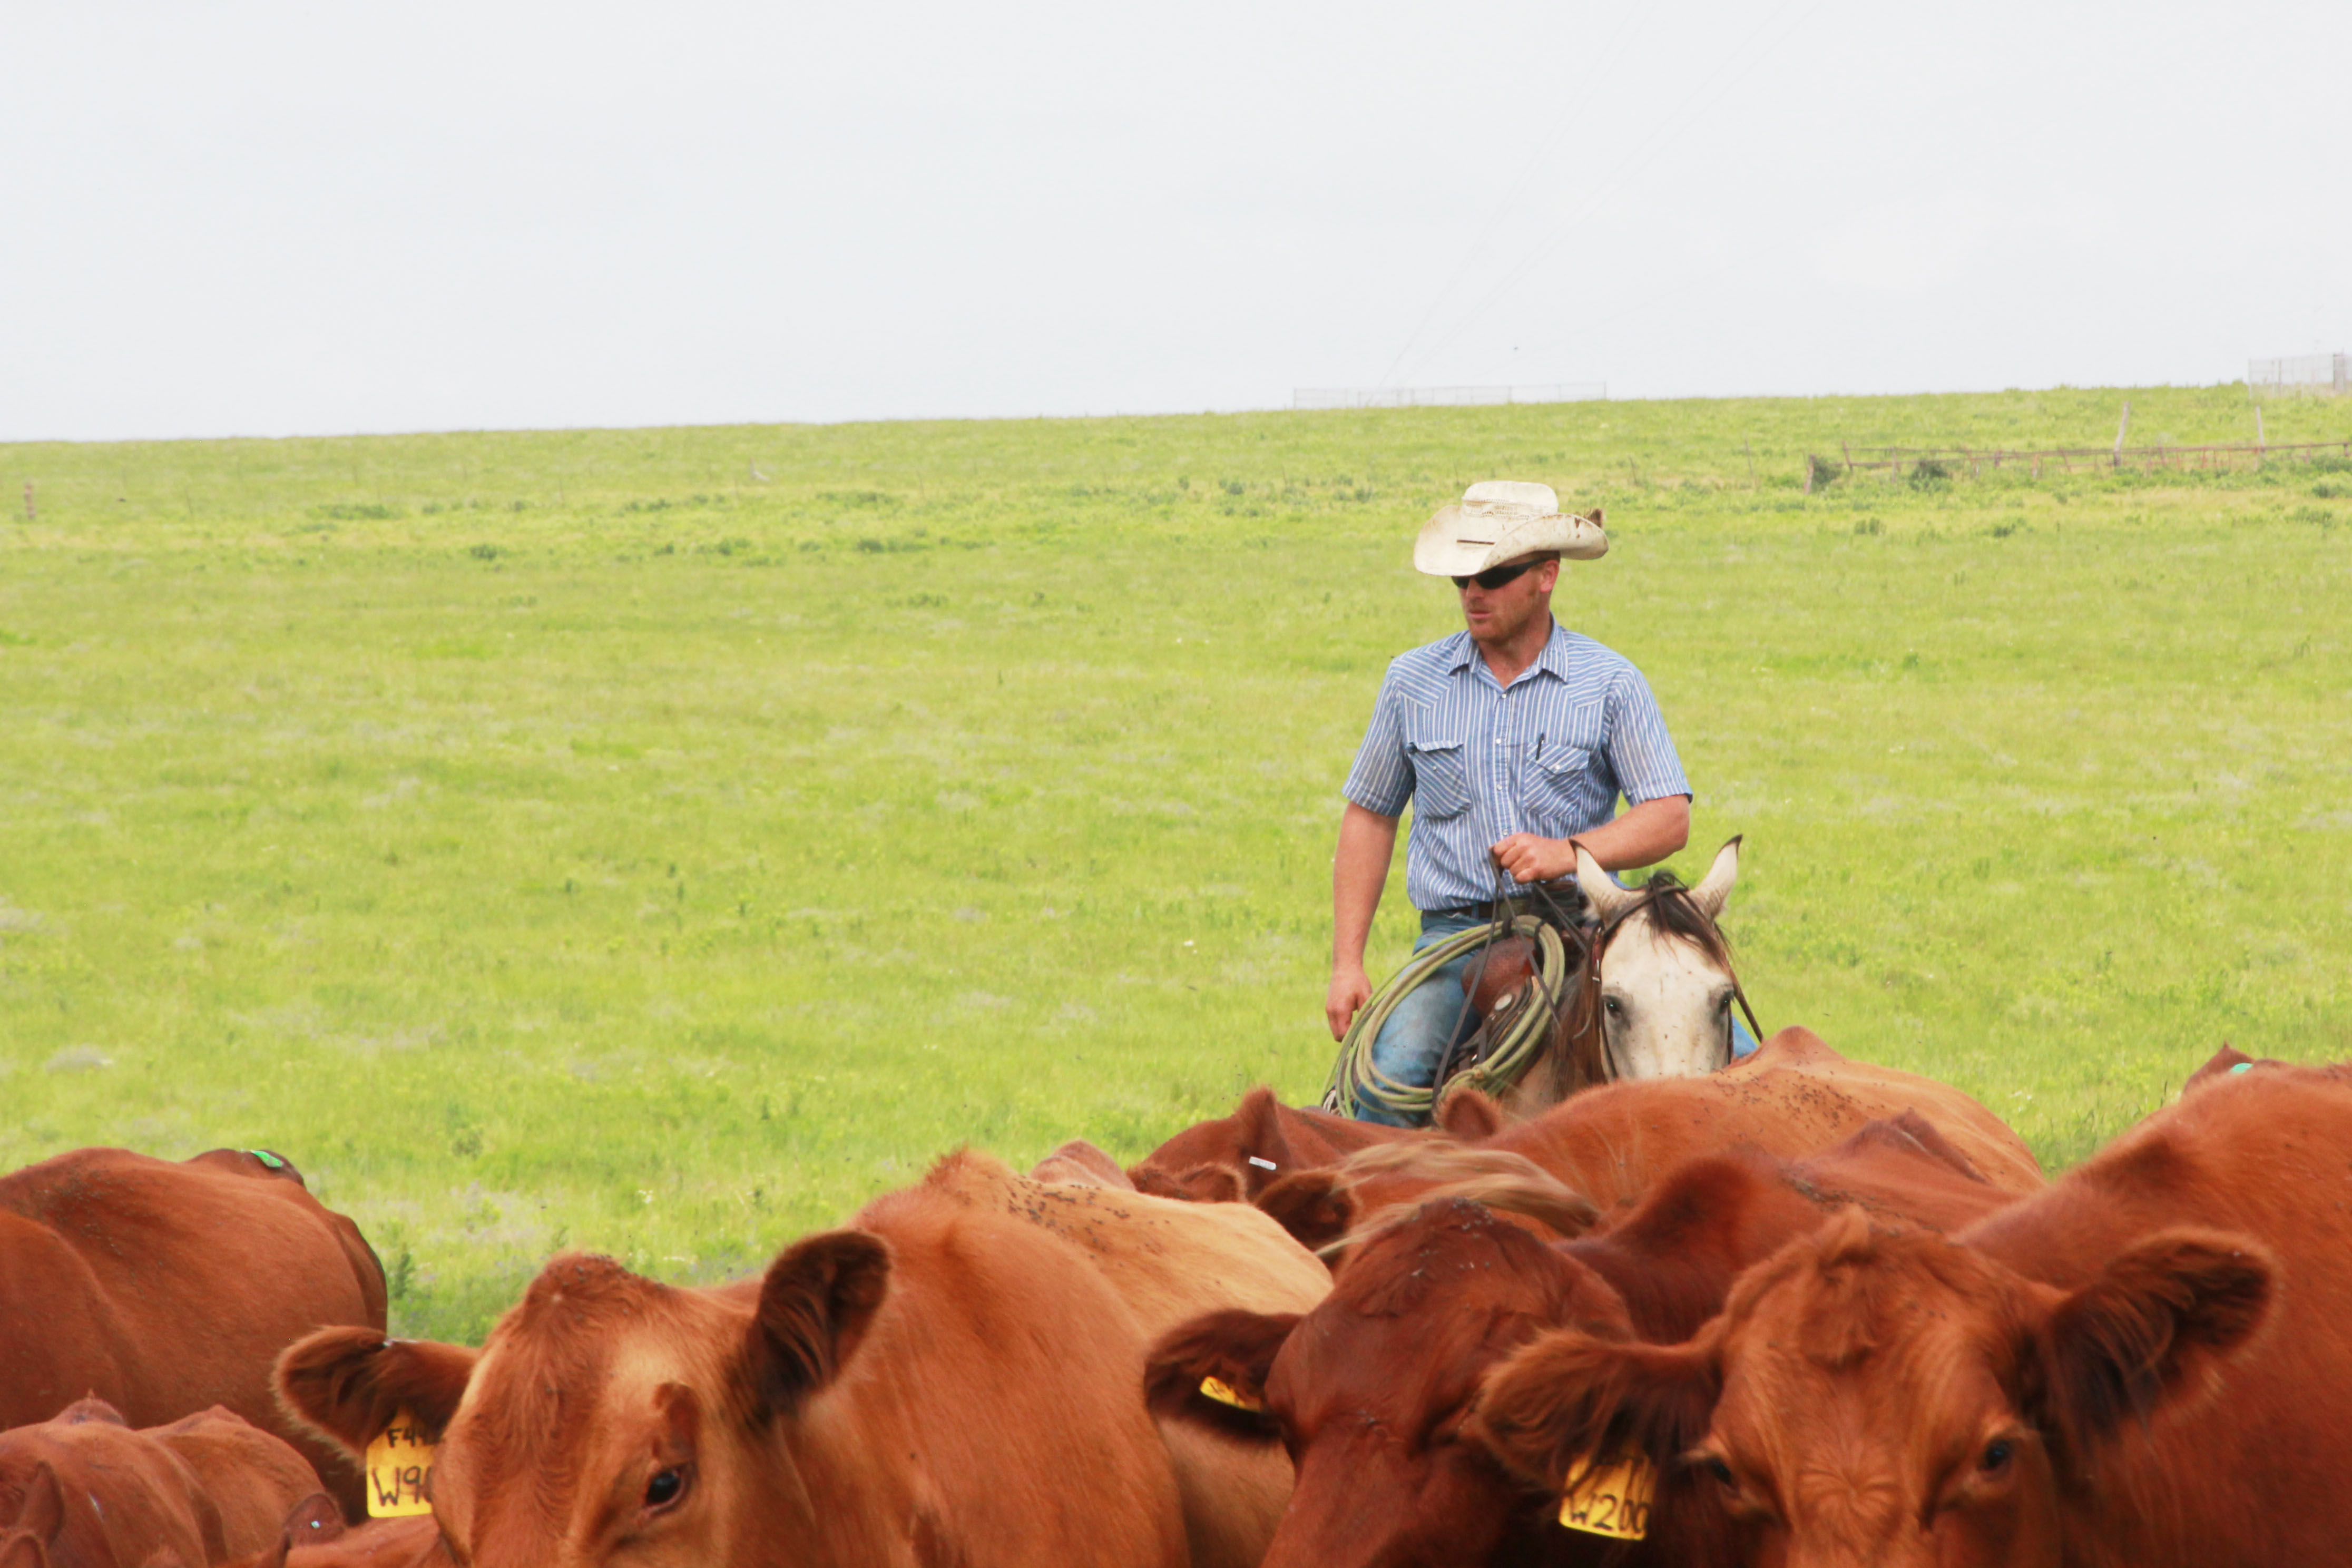 Low-Cost Production Typical of High-Profit Ranches - More Ranch Managers Who Get That Needed